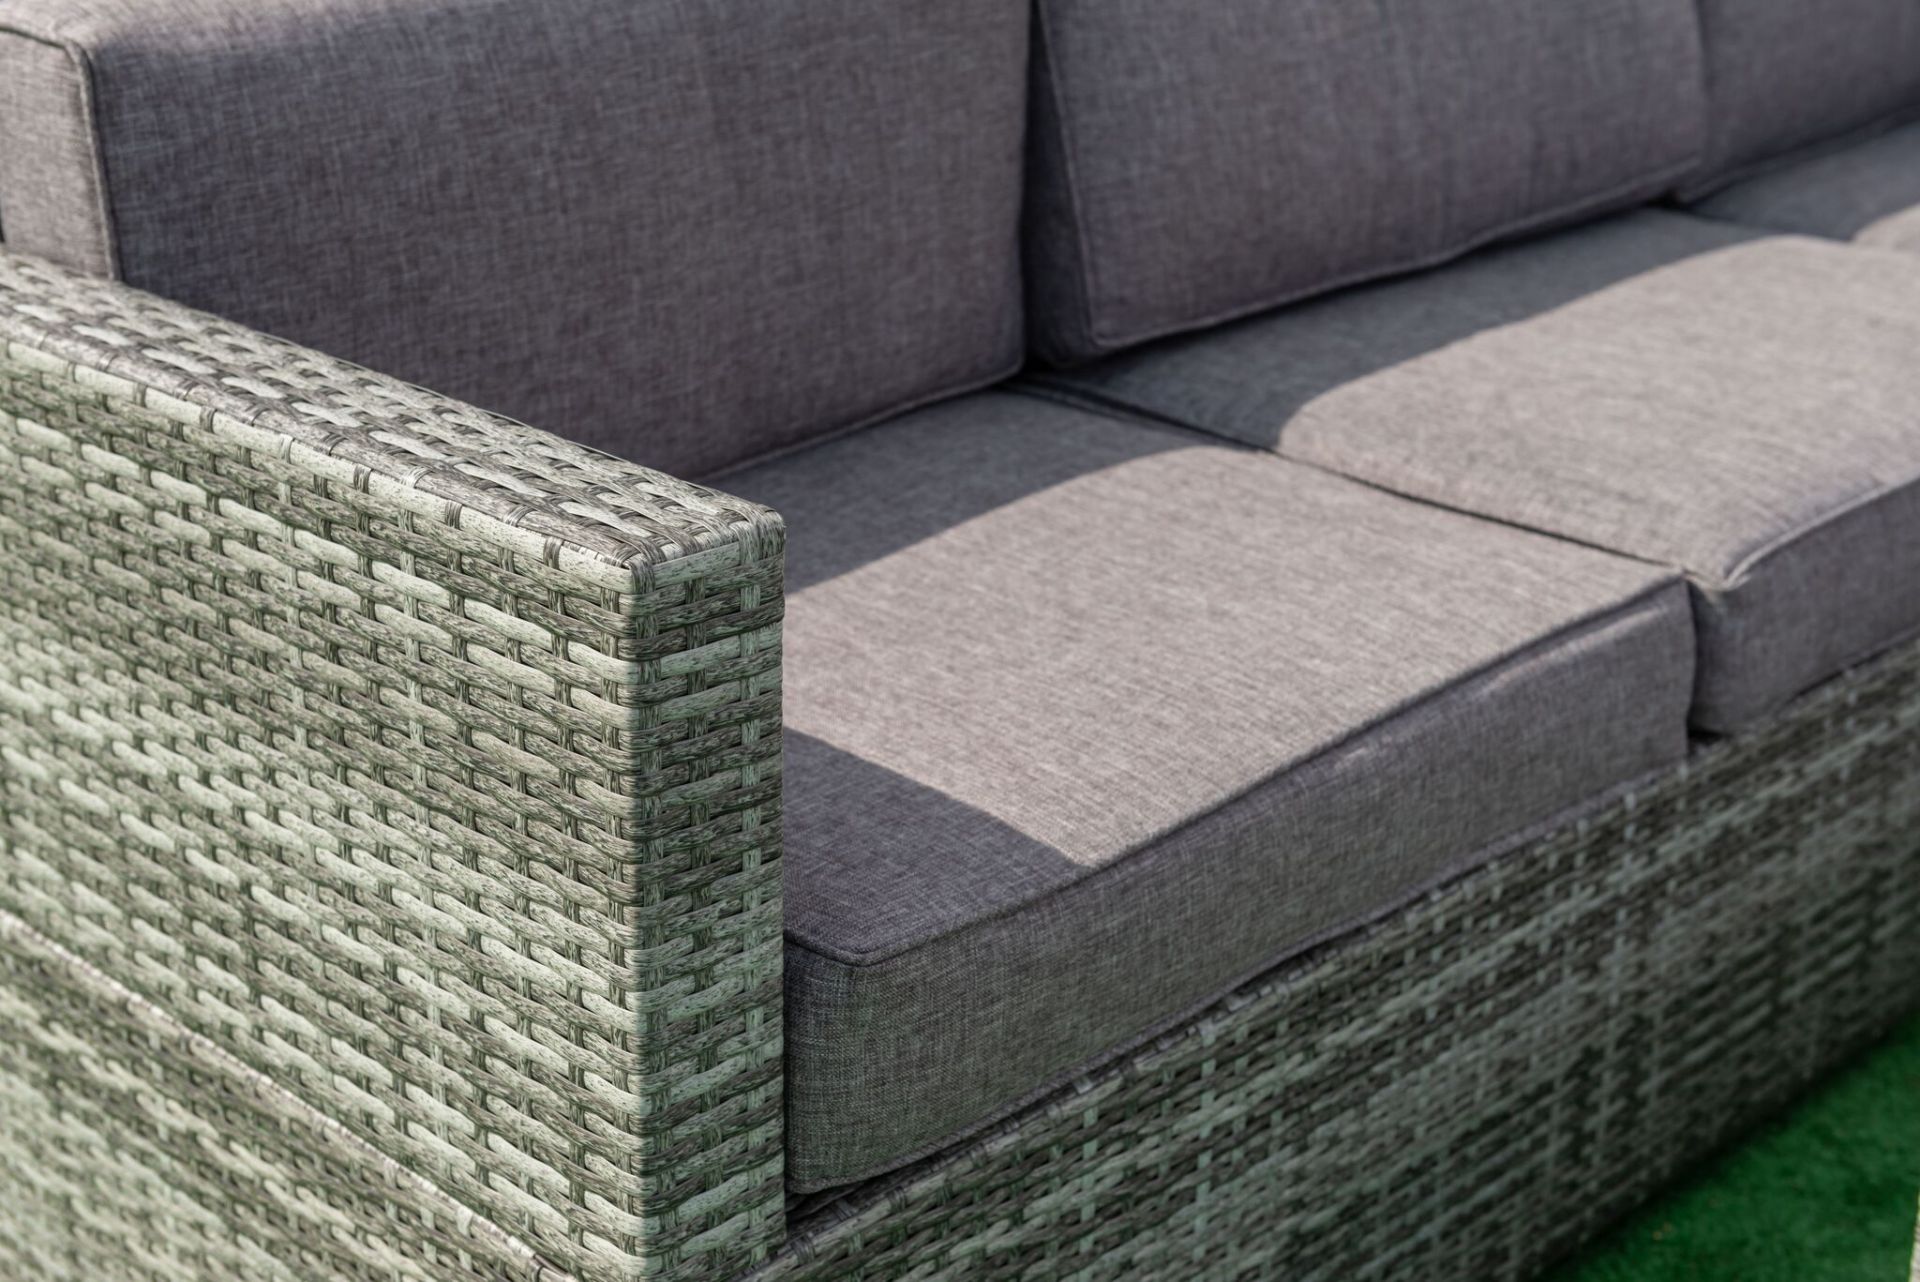 Newquay Corner Sofa Set in a Mixed Grey Pu Rattan with Contrasting Grey - Image 2 of 2